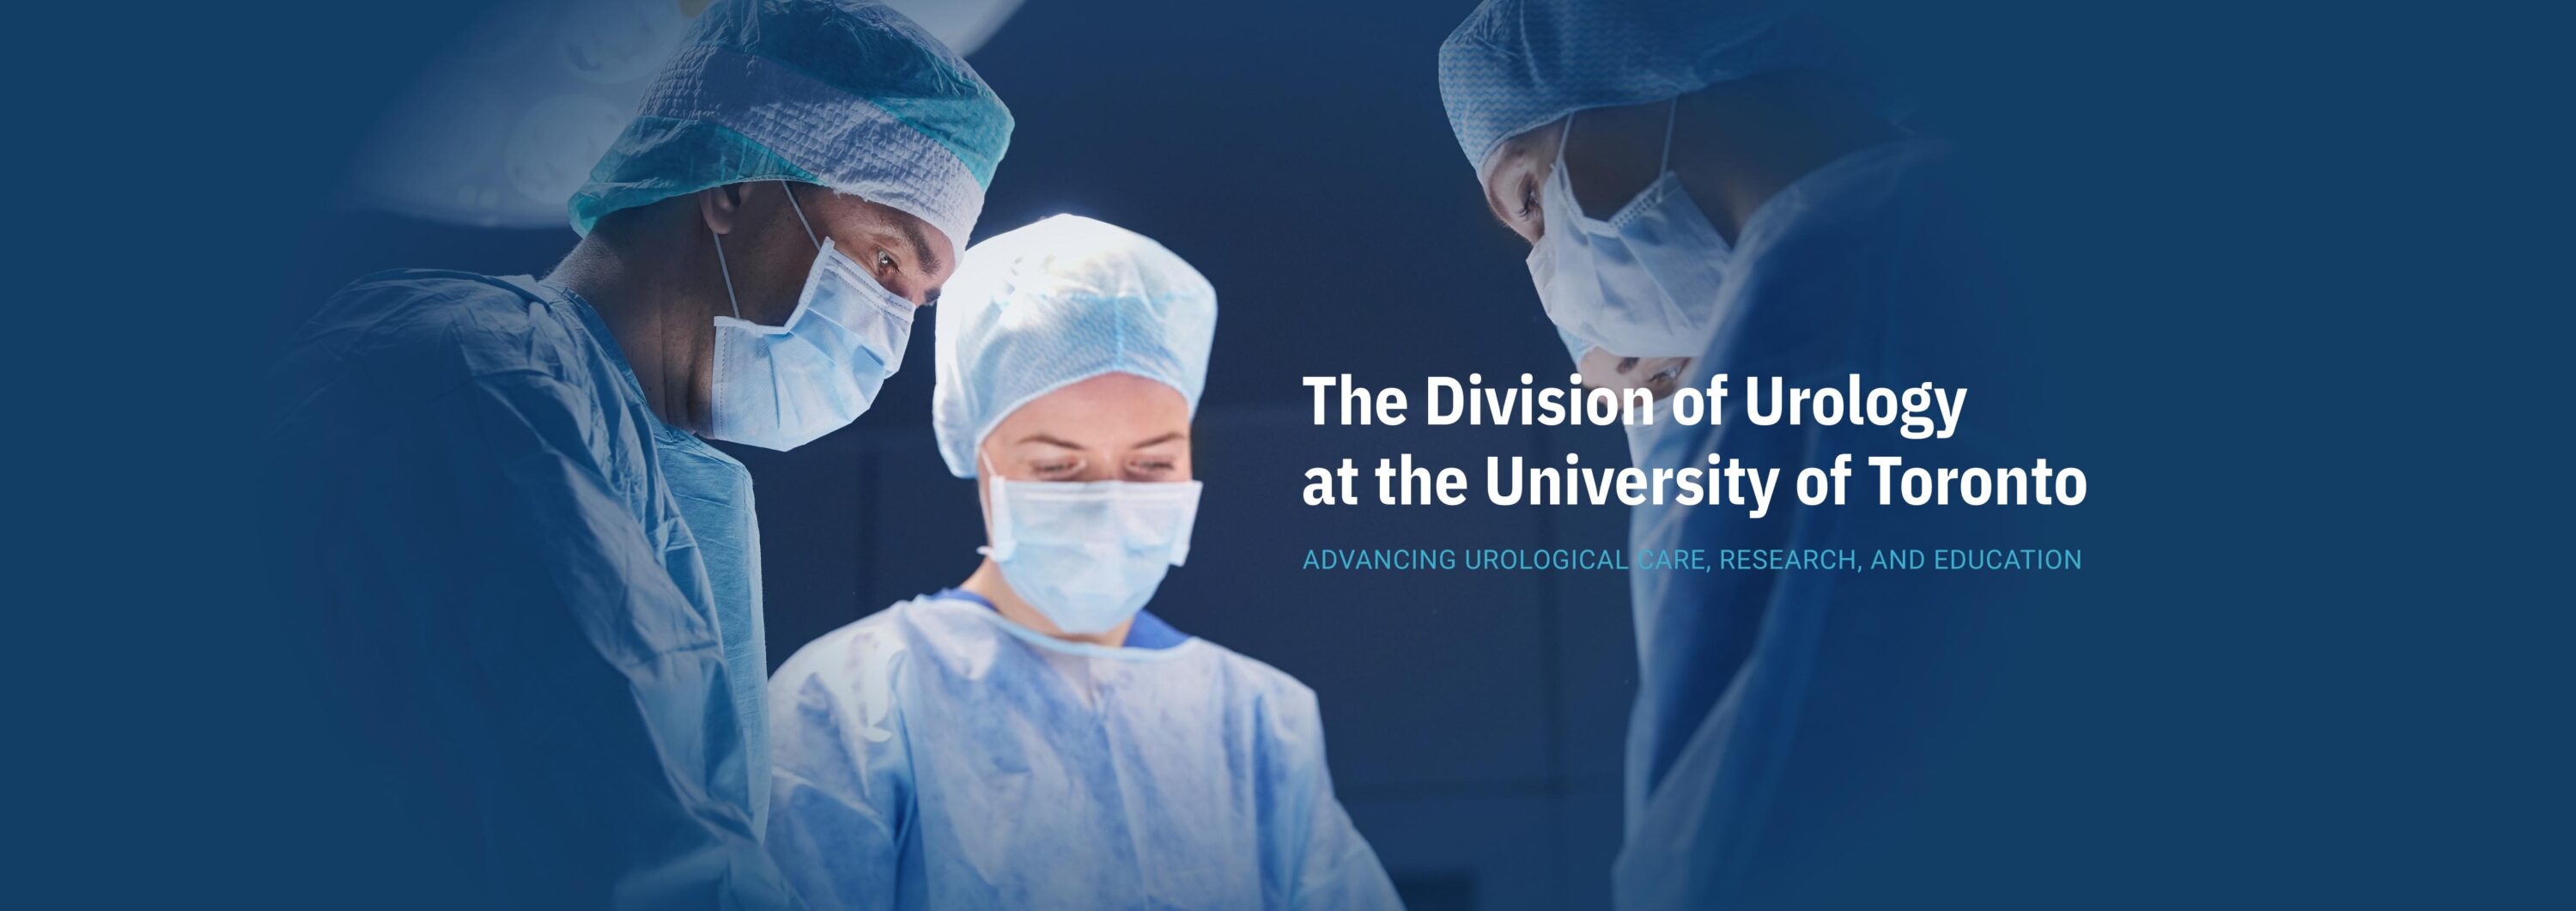 Welcome to the UofT Division of Urology website